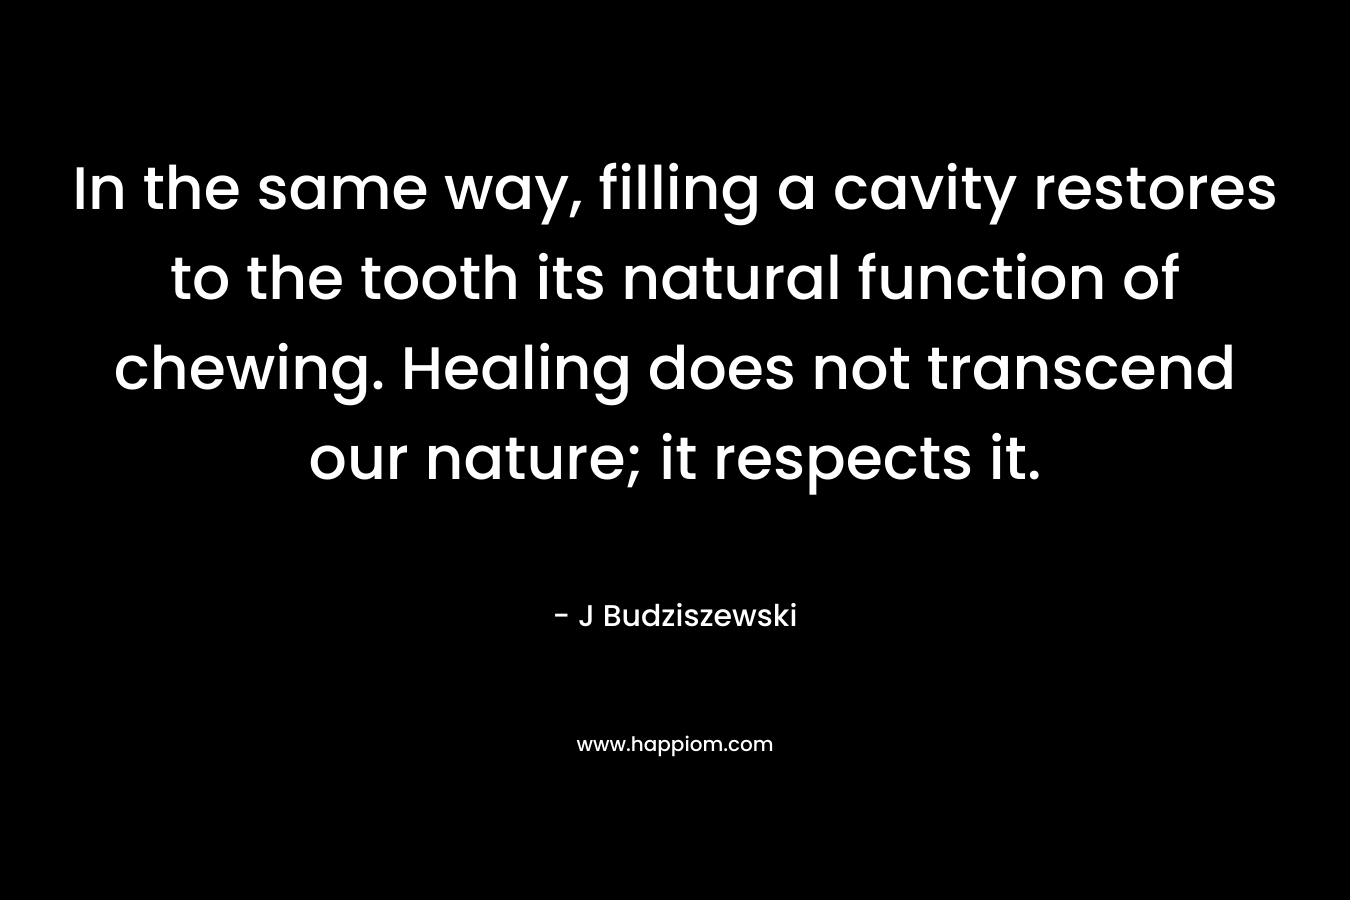 In the same way, filling a cavity restores to the tooth its natural function of chewing. Healing does not transcend our nature; it respects it.